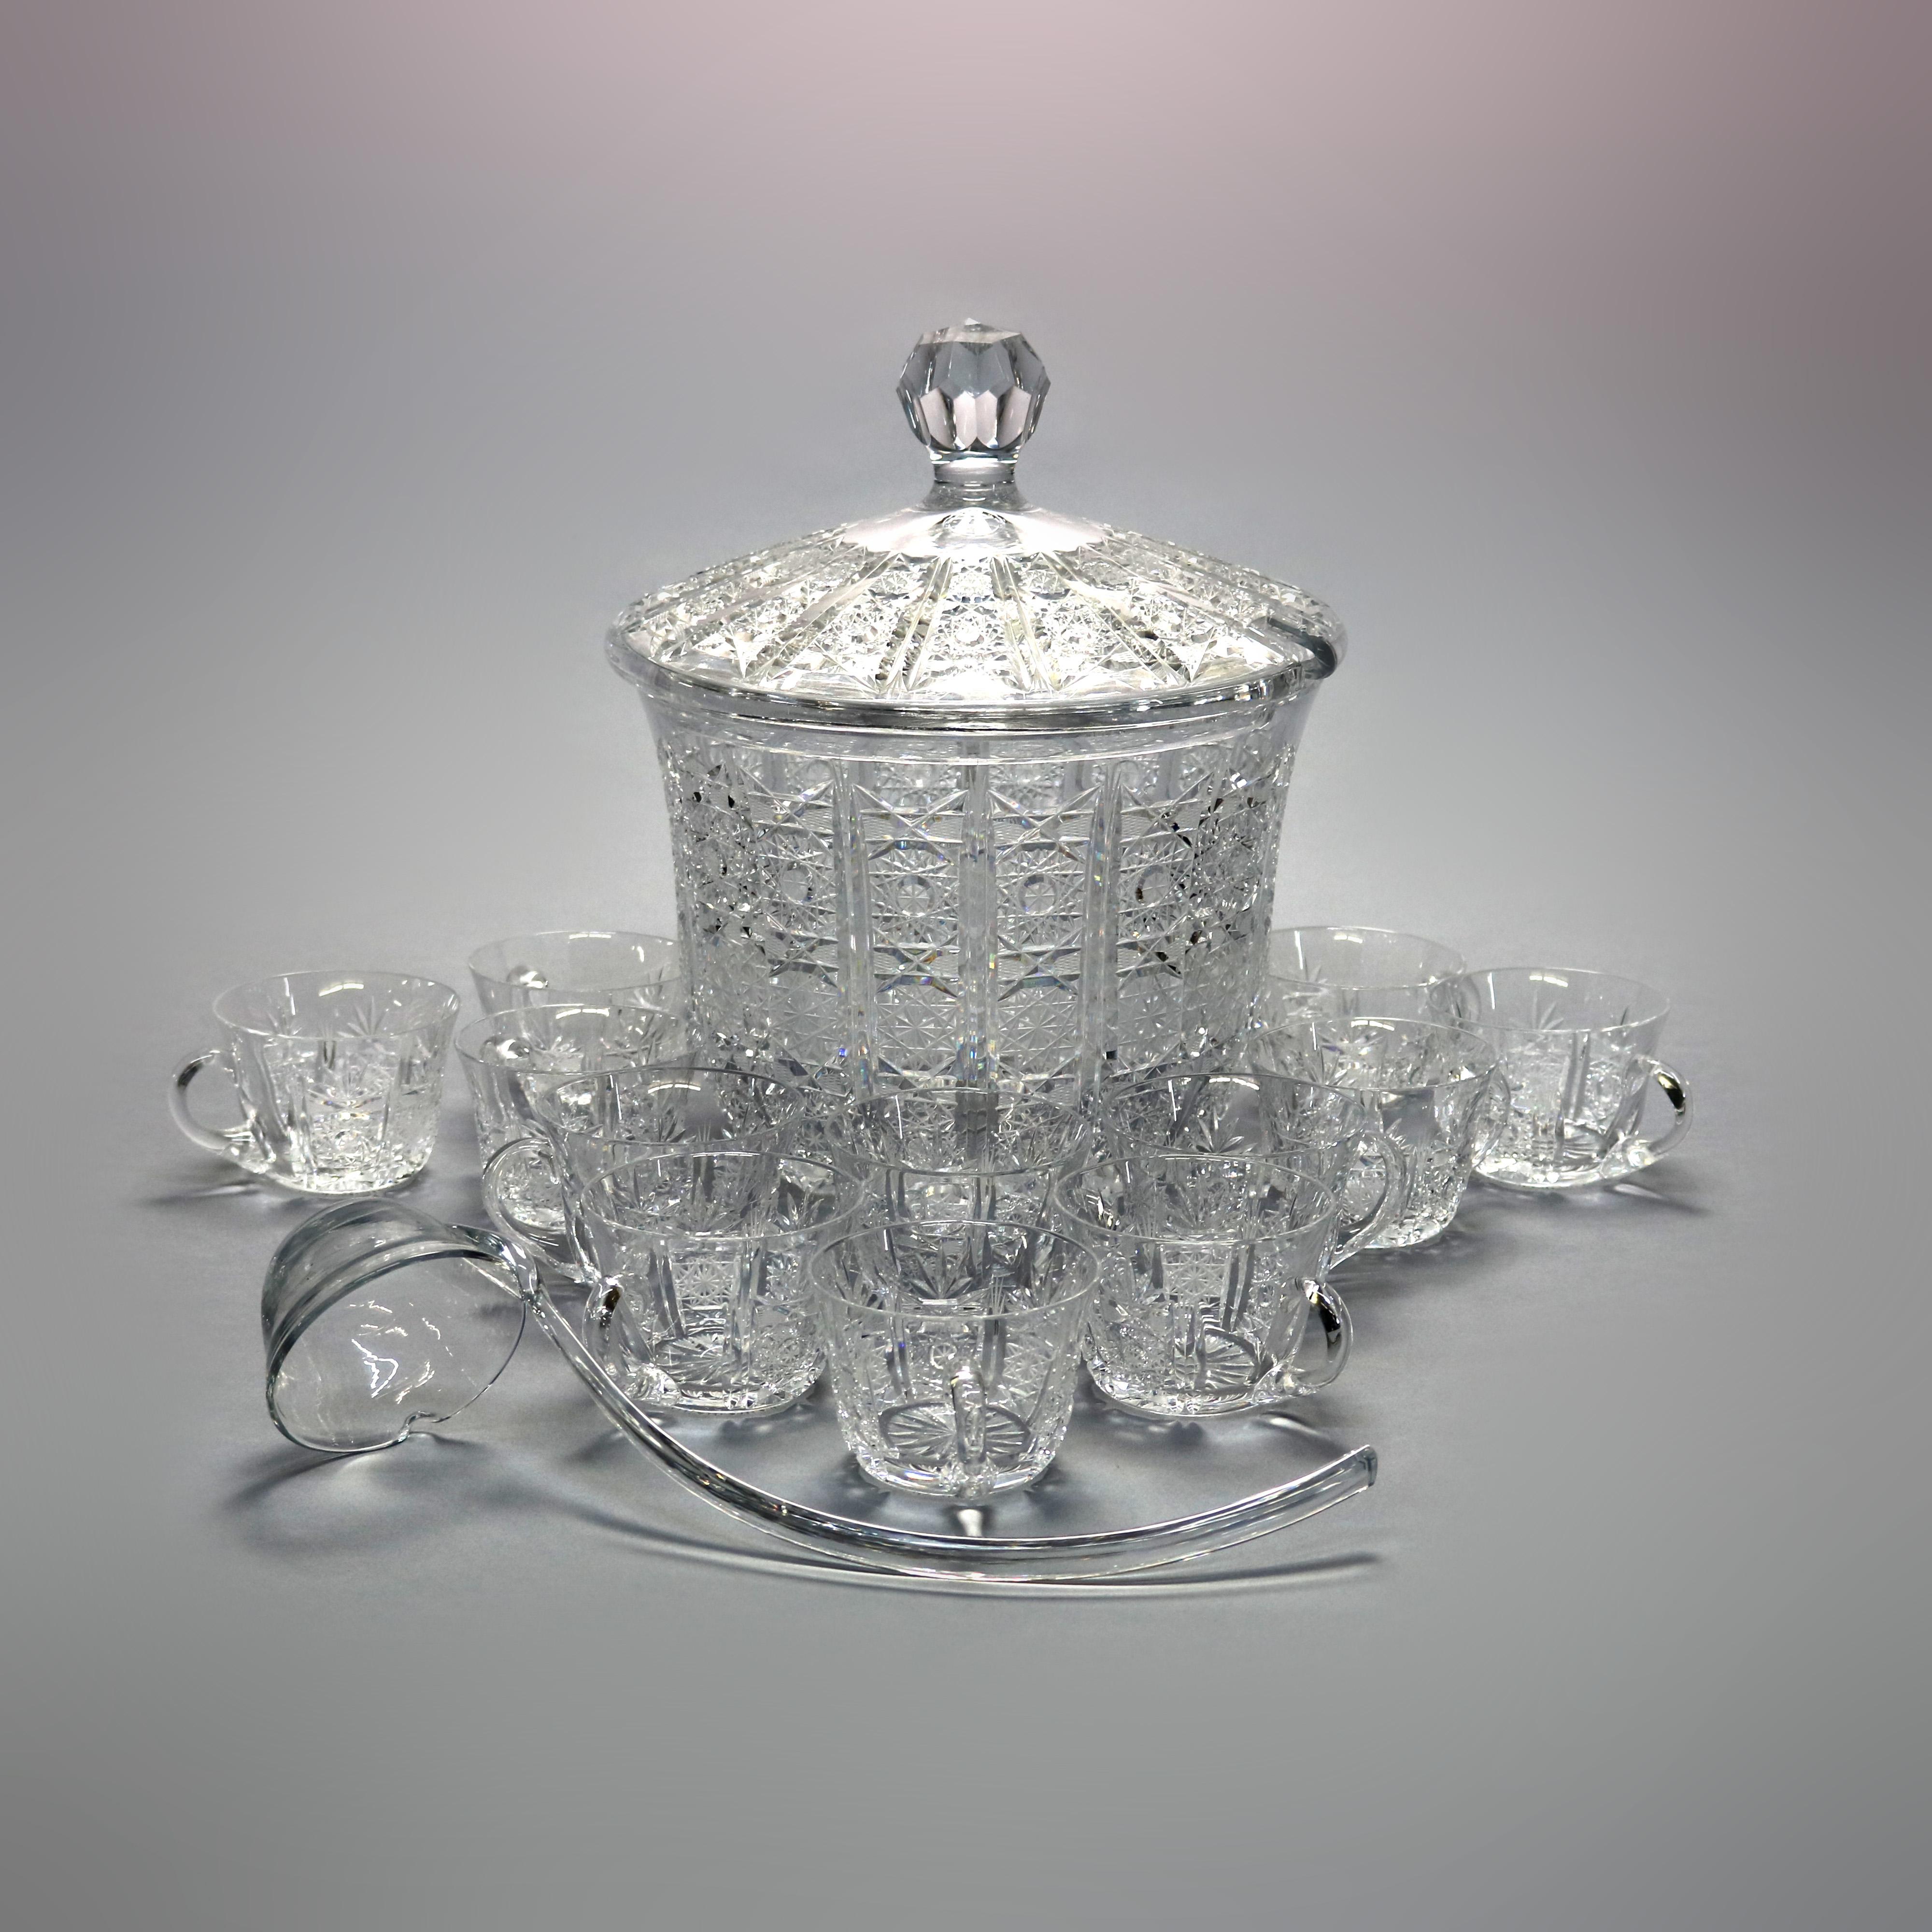 An antique punch bowl set by Waterford of Ireland offers covered cut crystal lidded punch bowl with twelve handled cups and ladle, signed Waterford, c1930 

Measures: Ladle 13.5